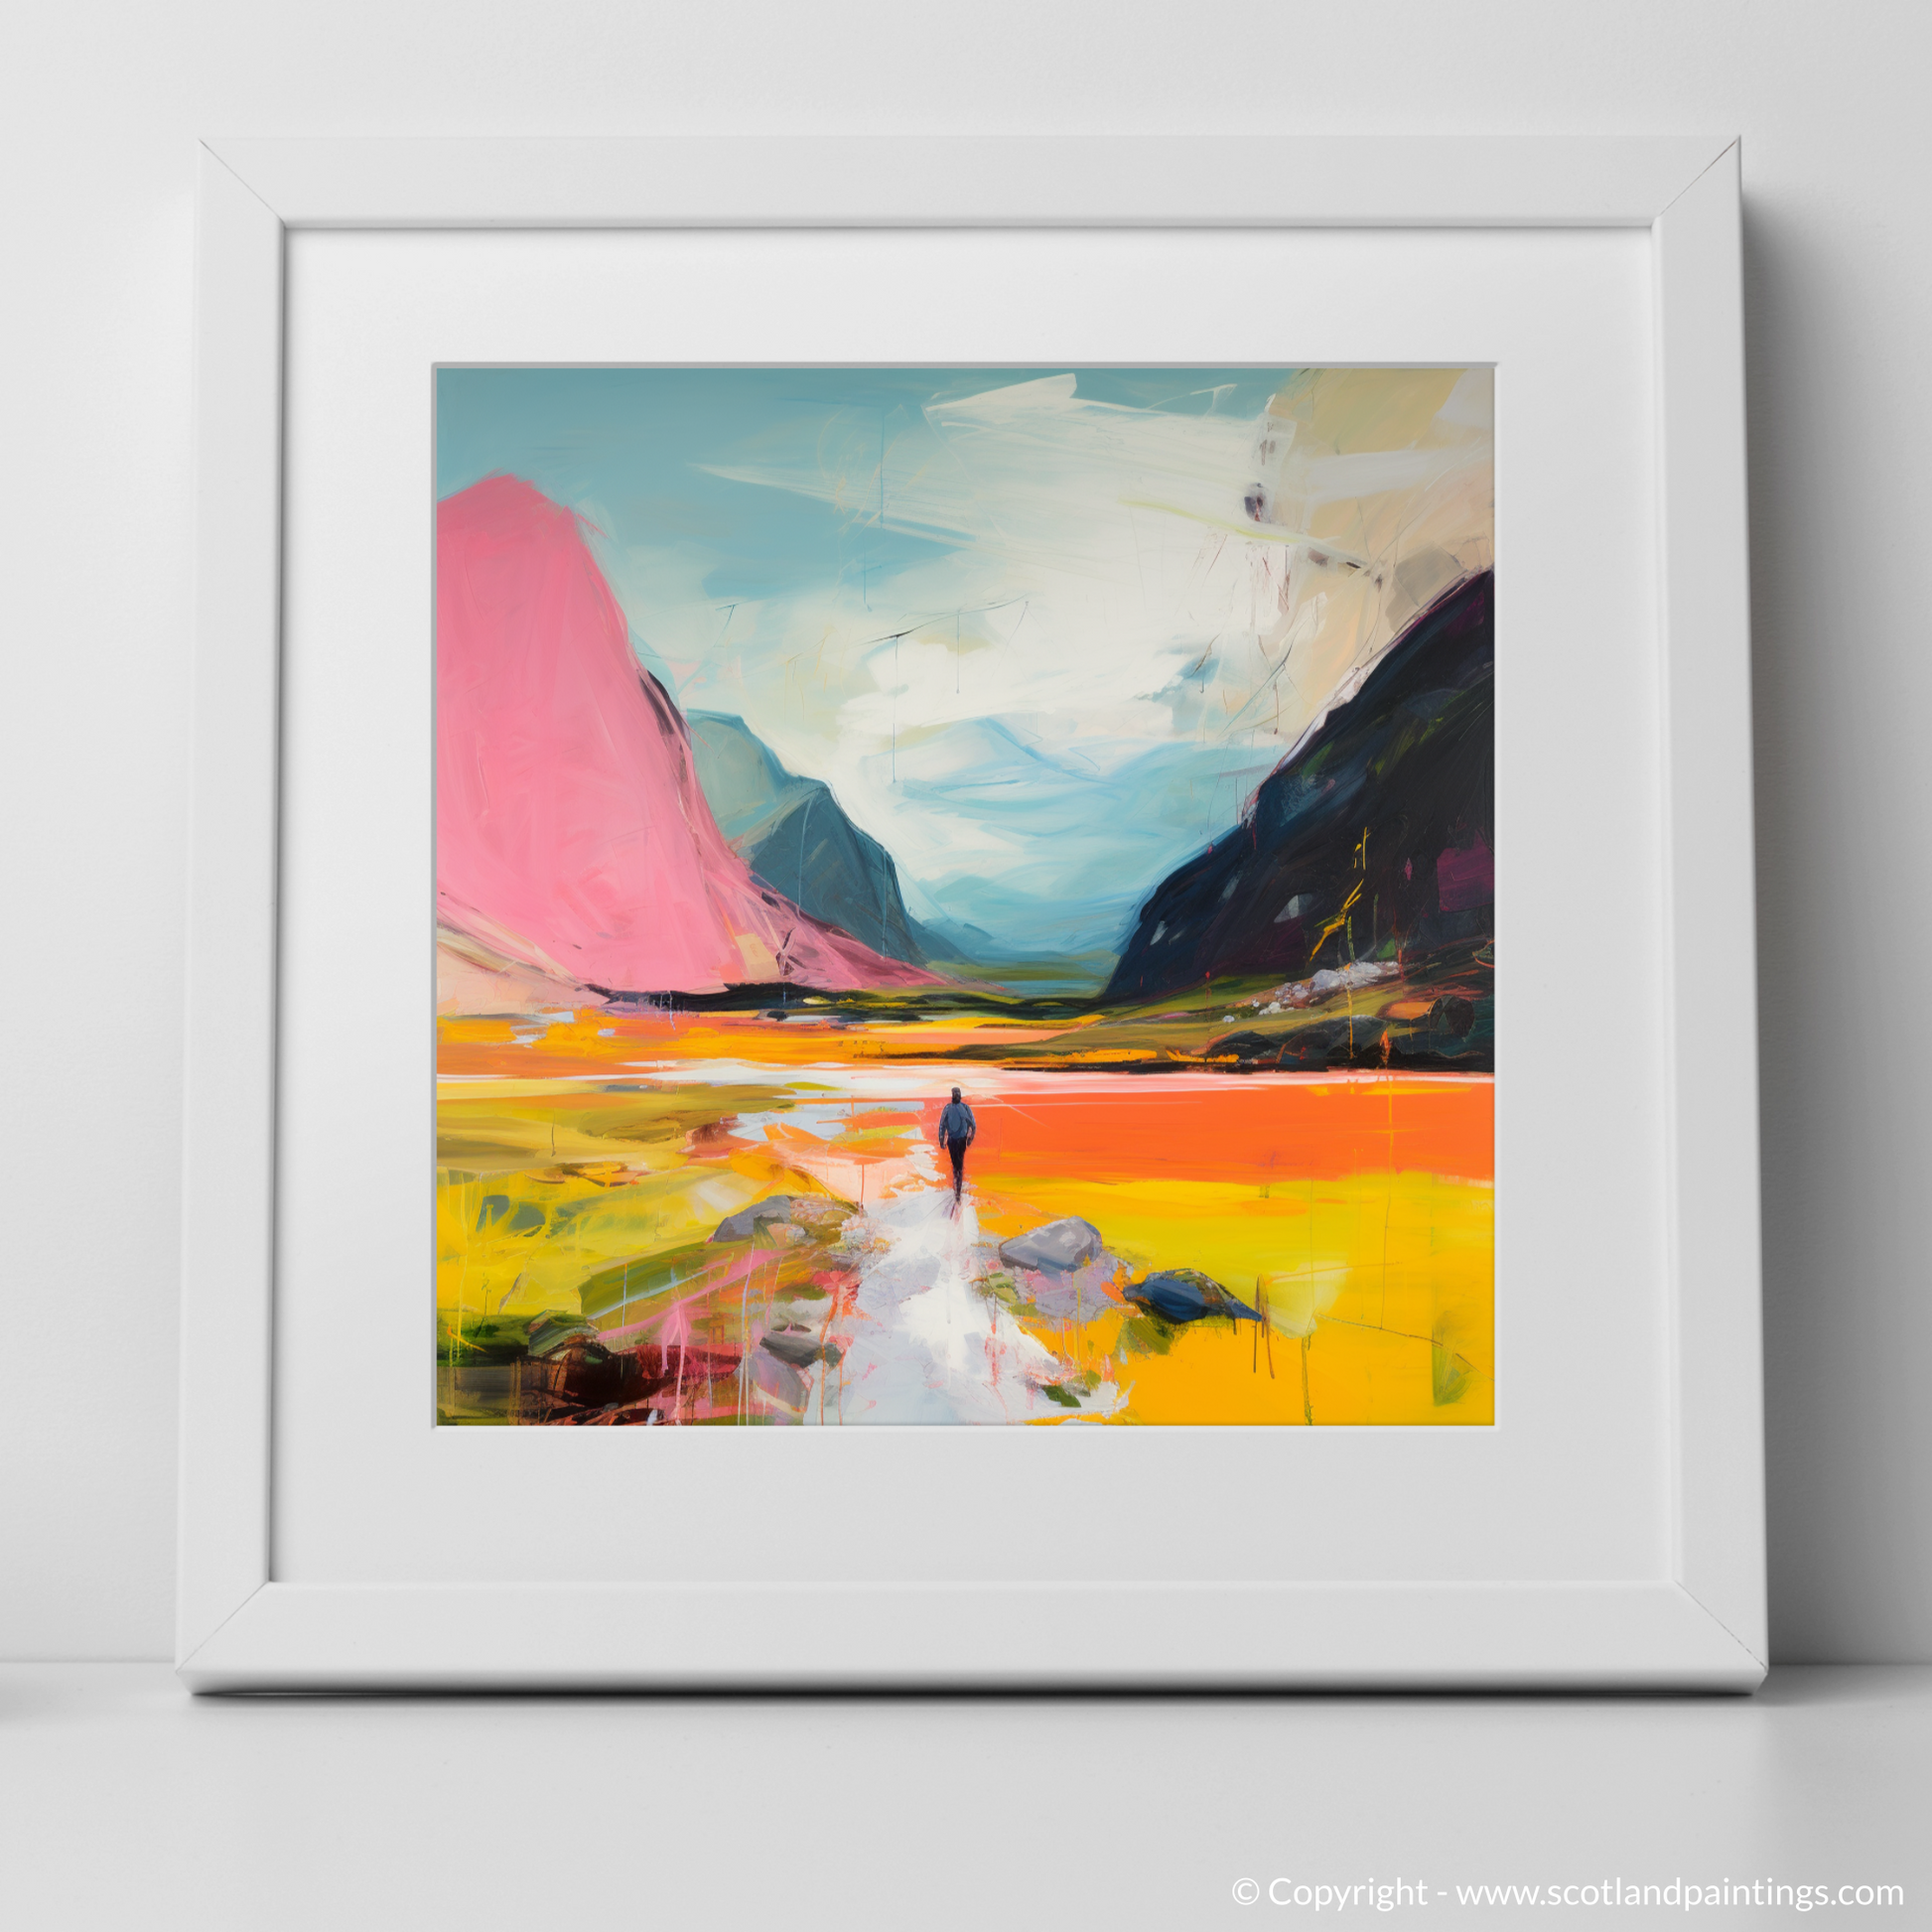 Art Print of Lone hiker in Glencoe during summer with a white frame